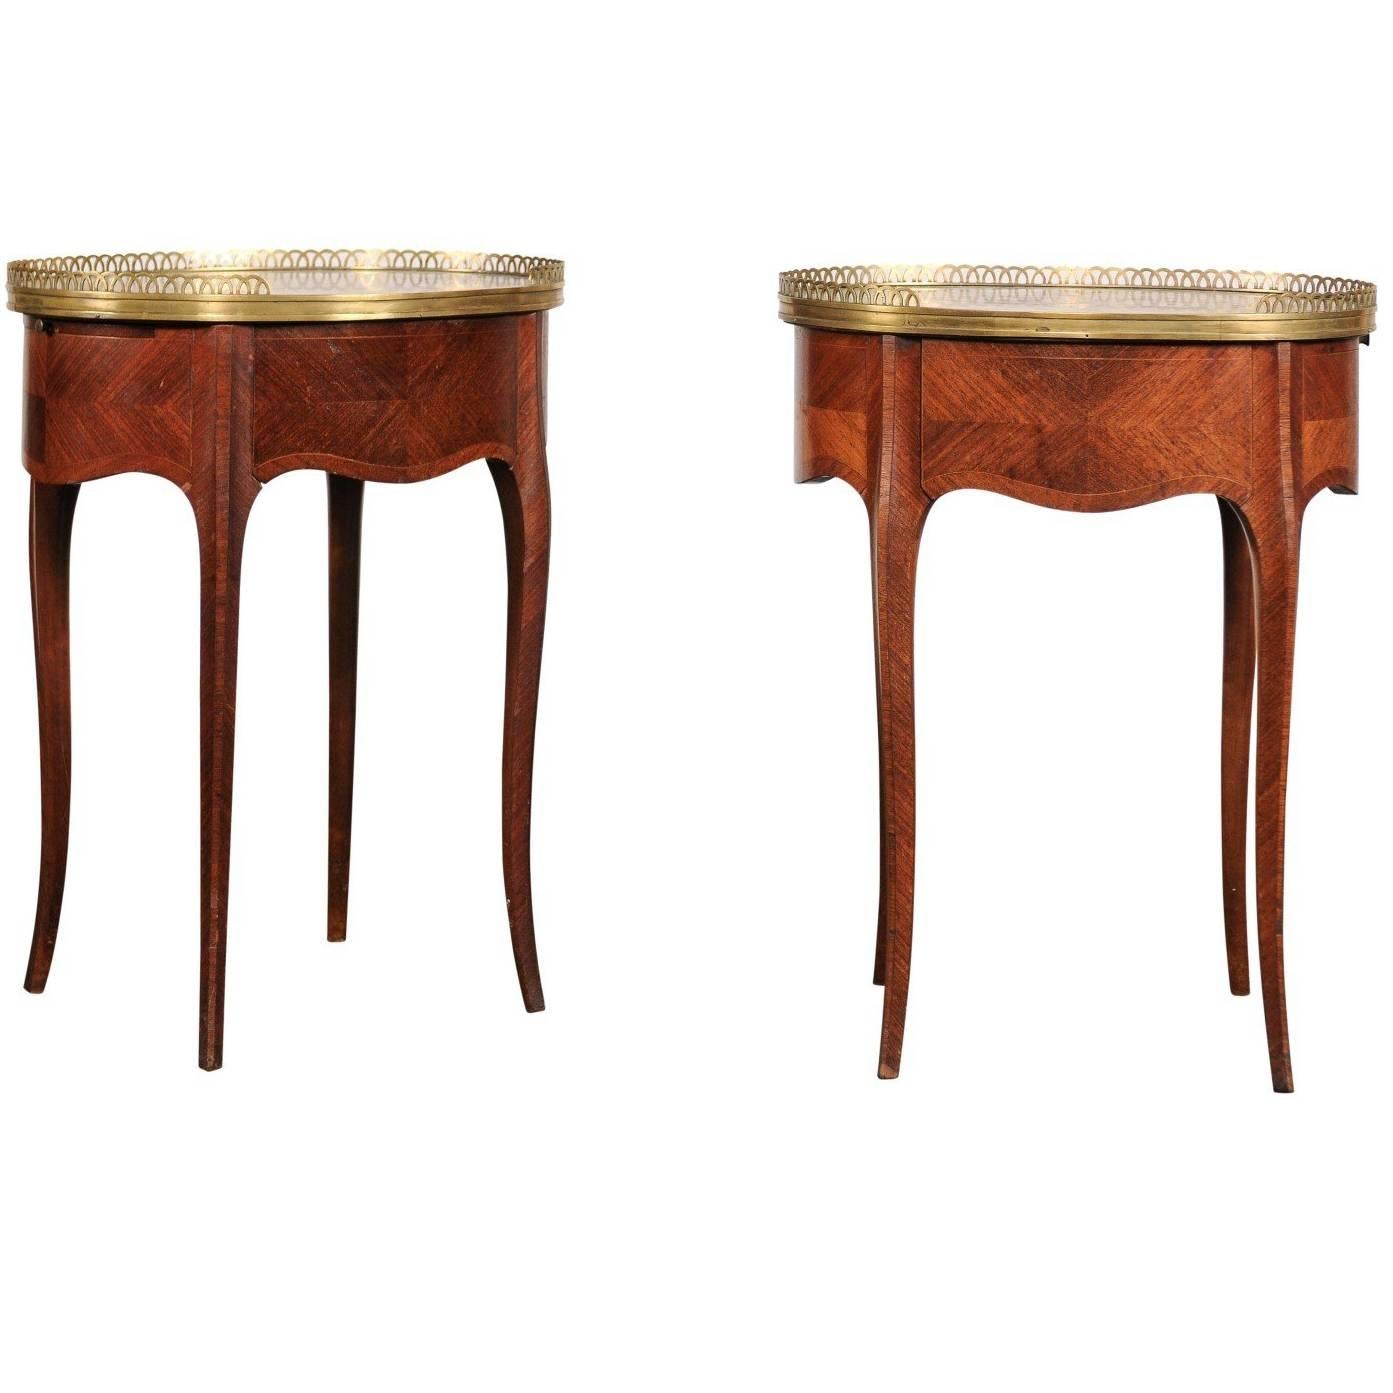 Pair of circa 1900 French Marble-Top, Bronze Gallery Tables with Drawers